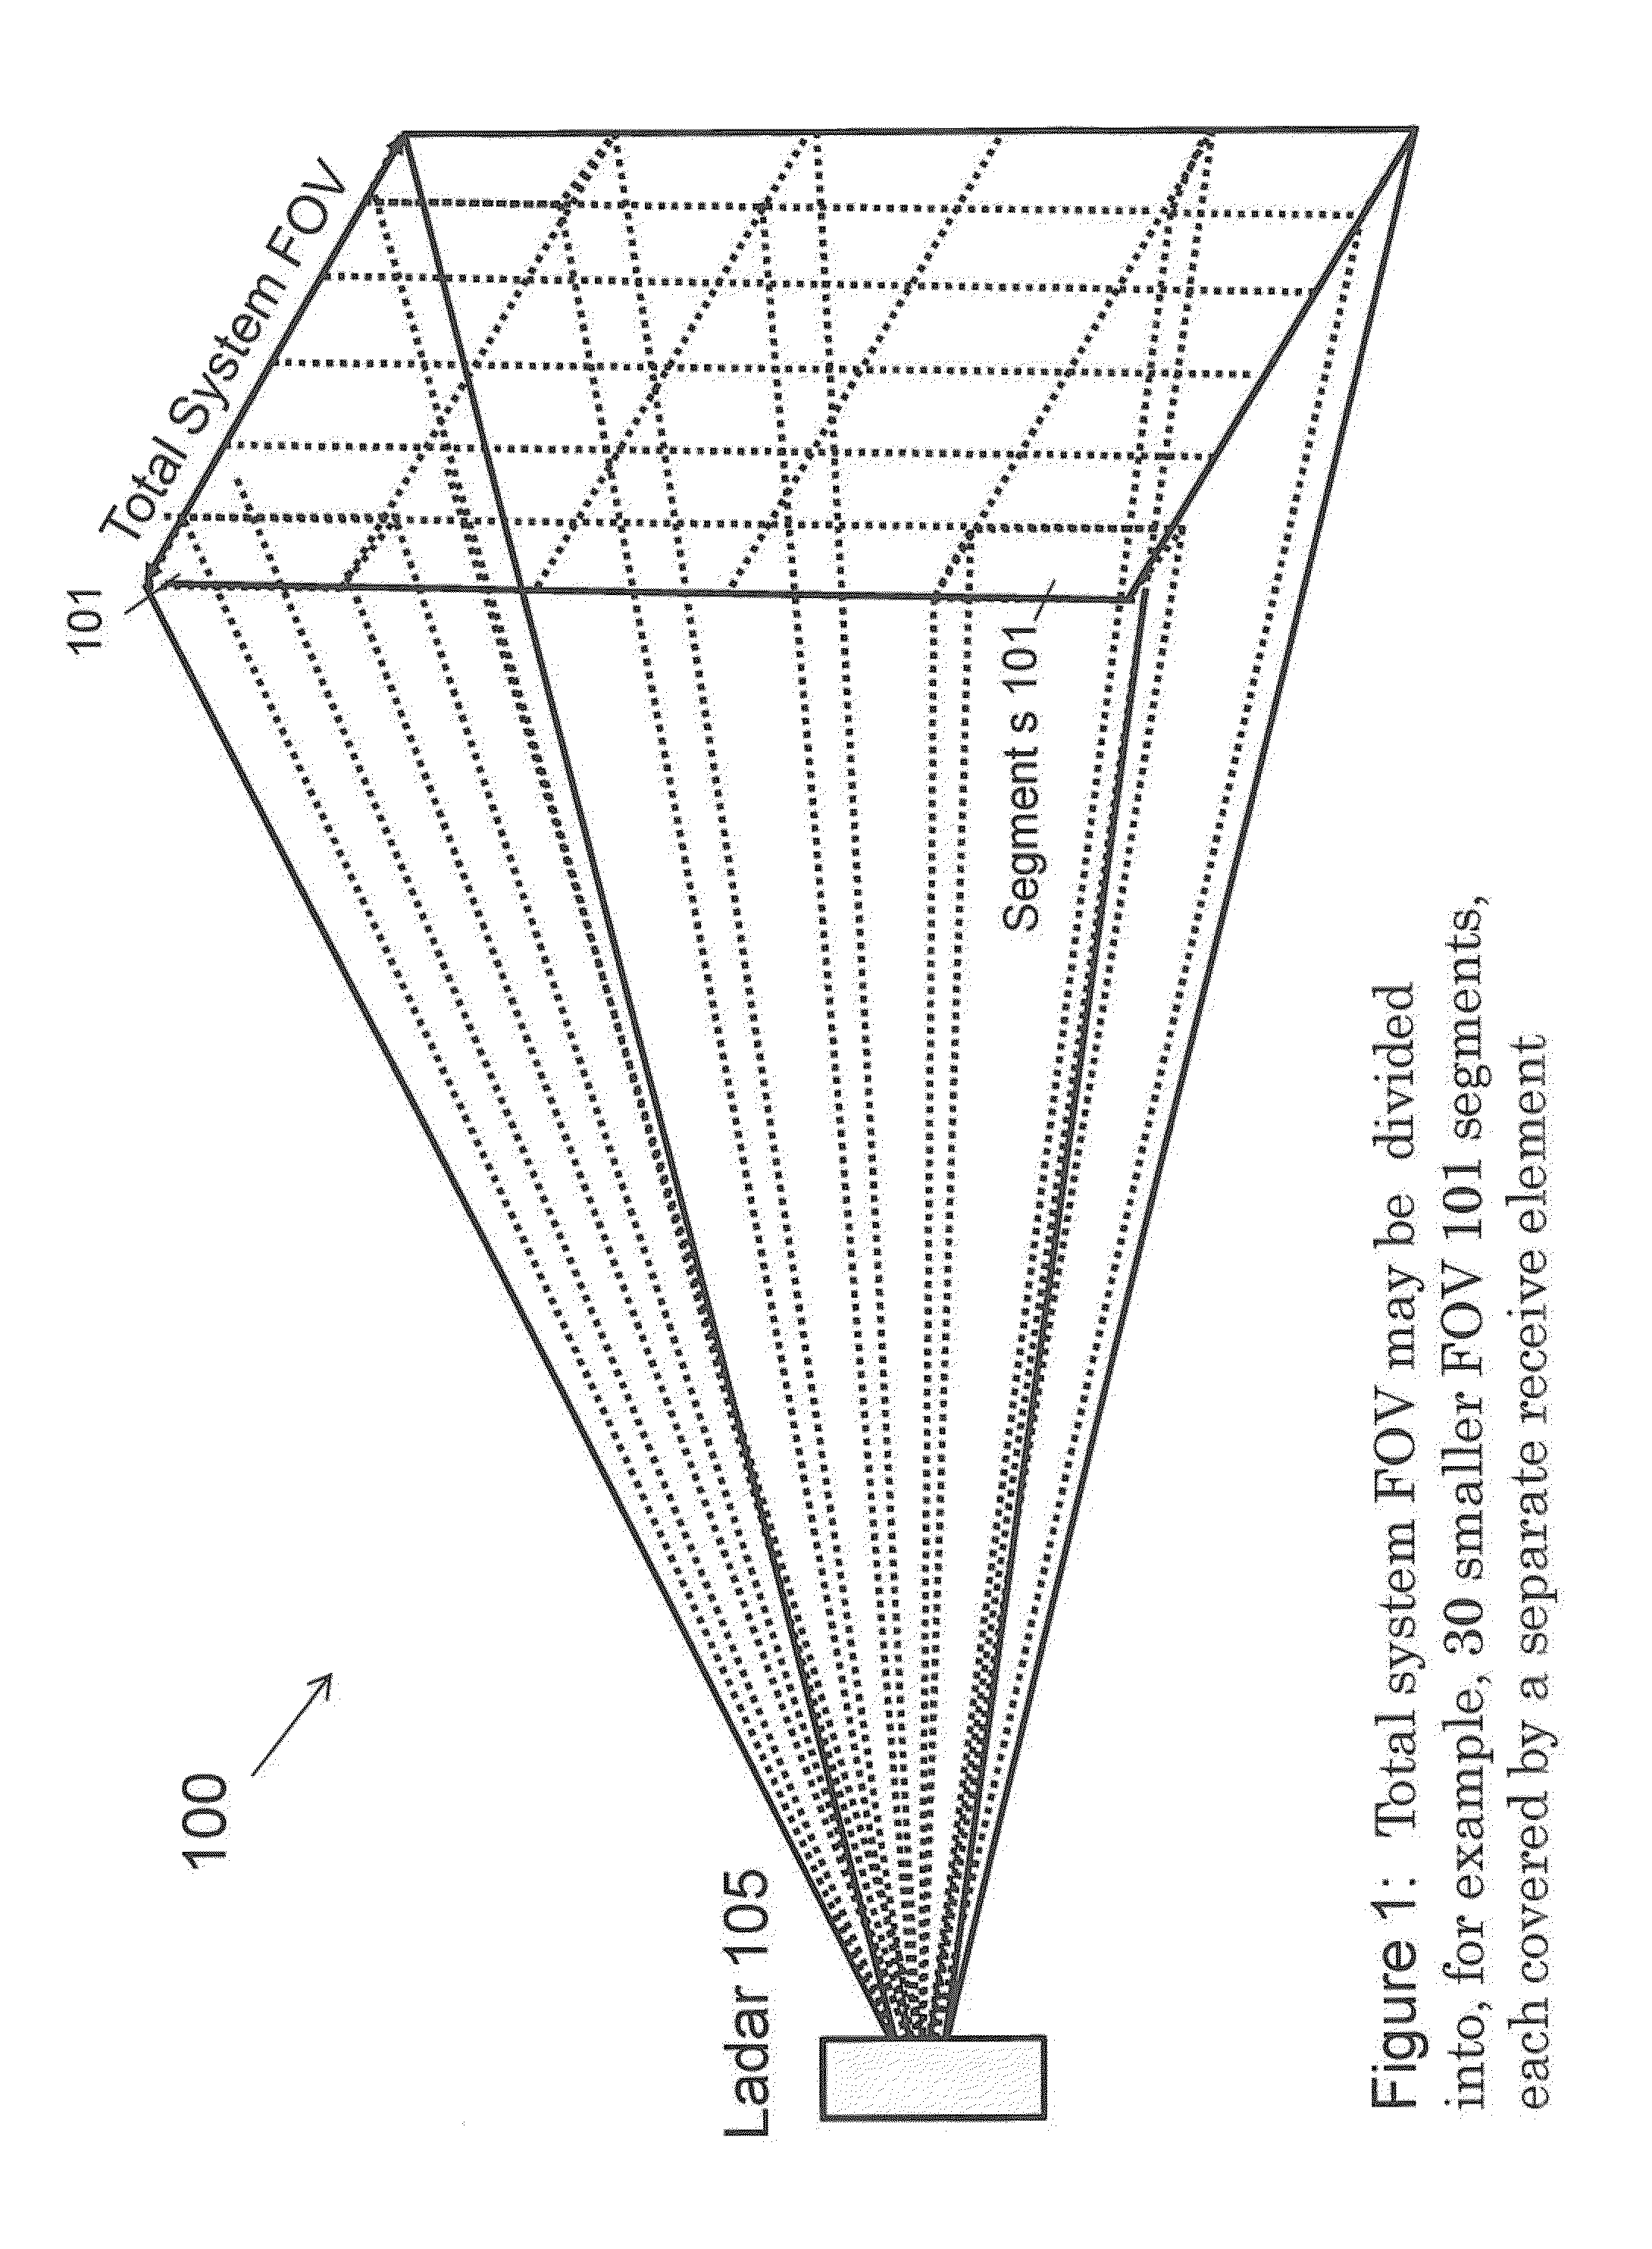 System for laser detection with enhanced field of view